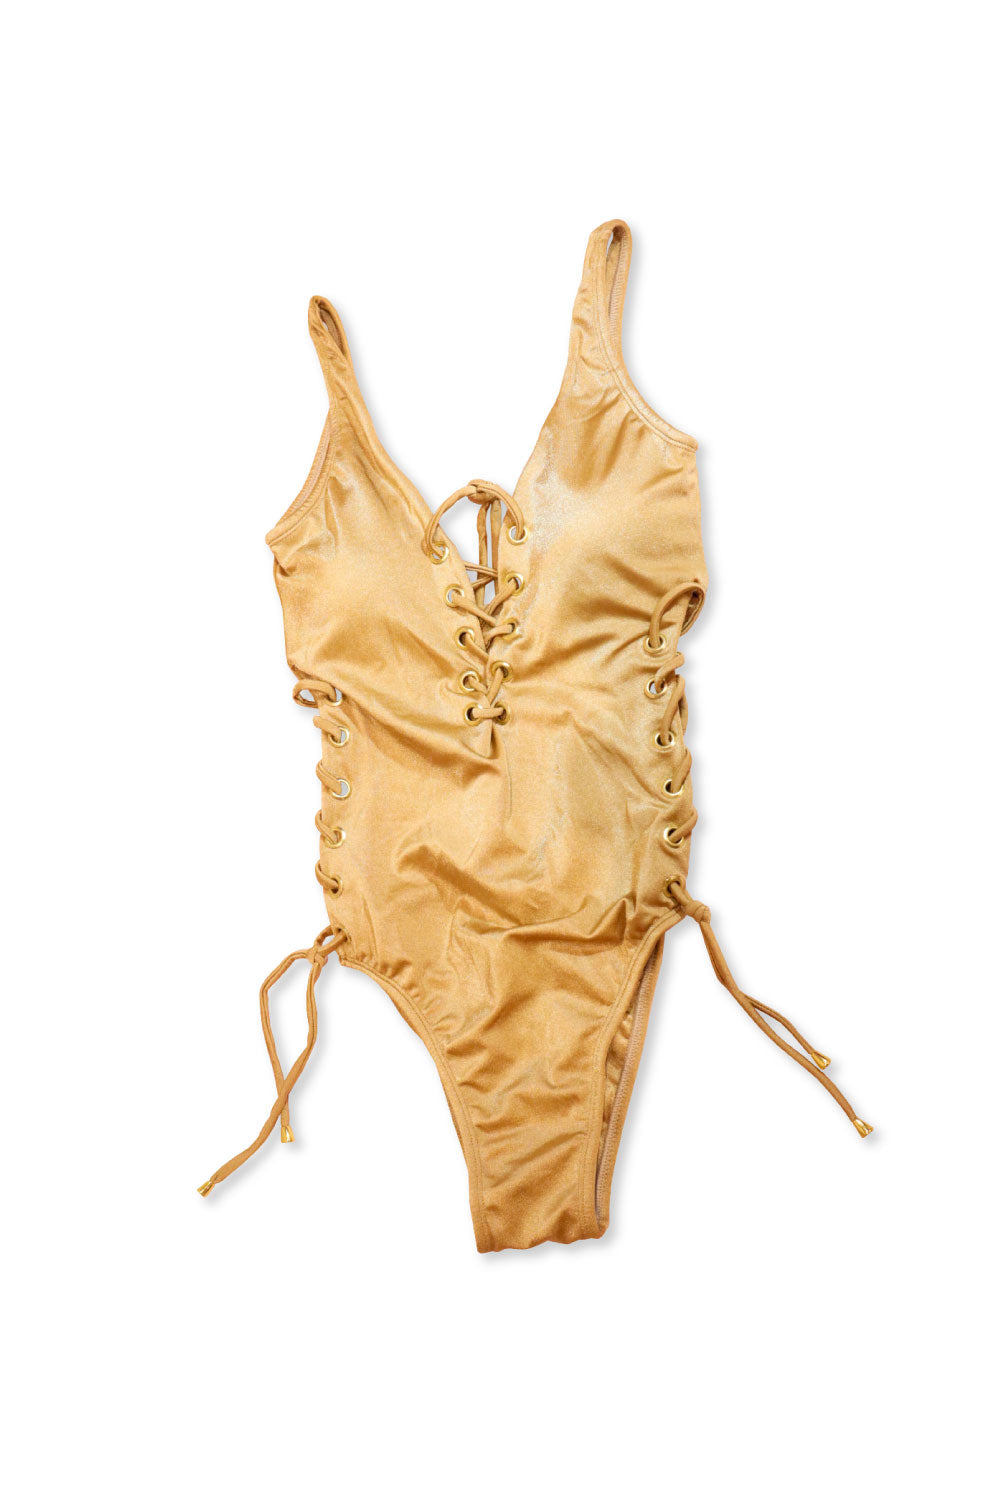 Image of the front of Lateen's Open-Sided One Piece Swimsuit in Gold.